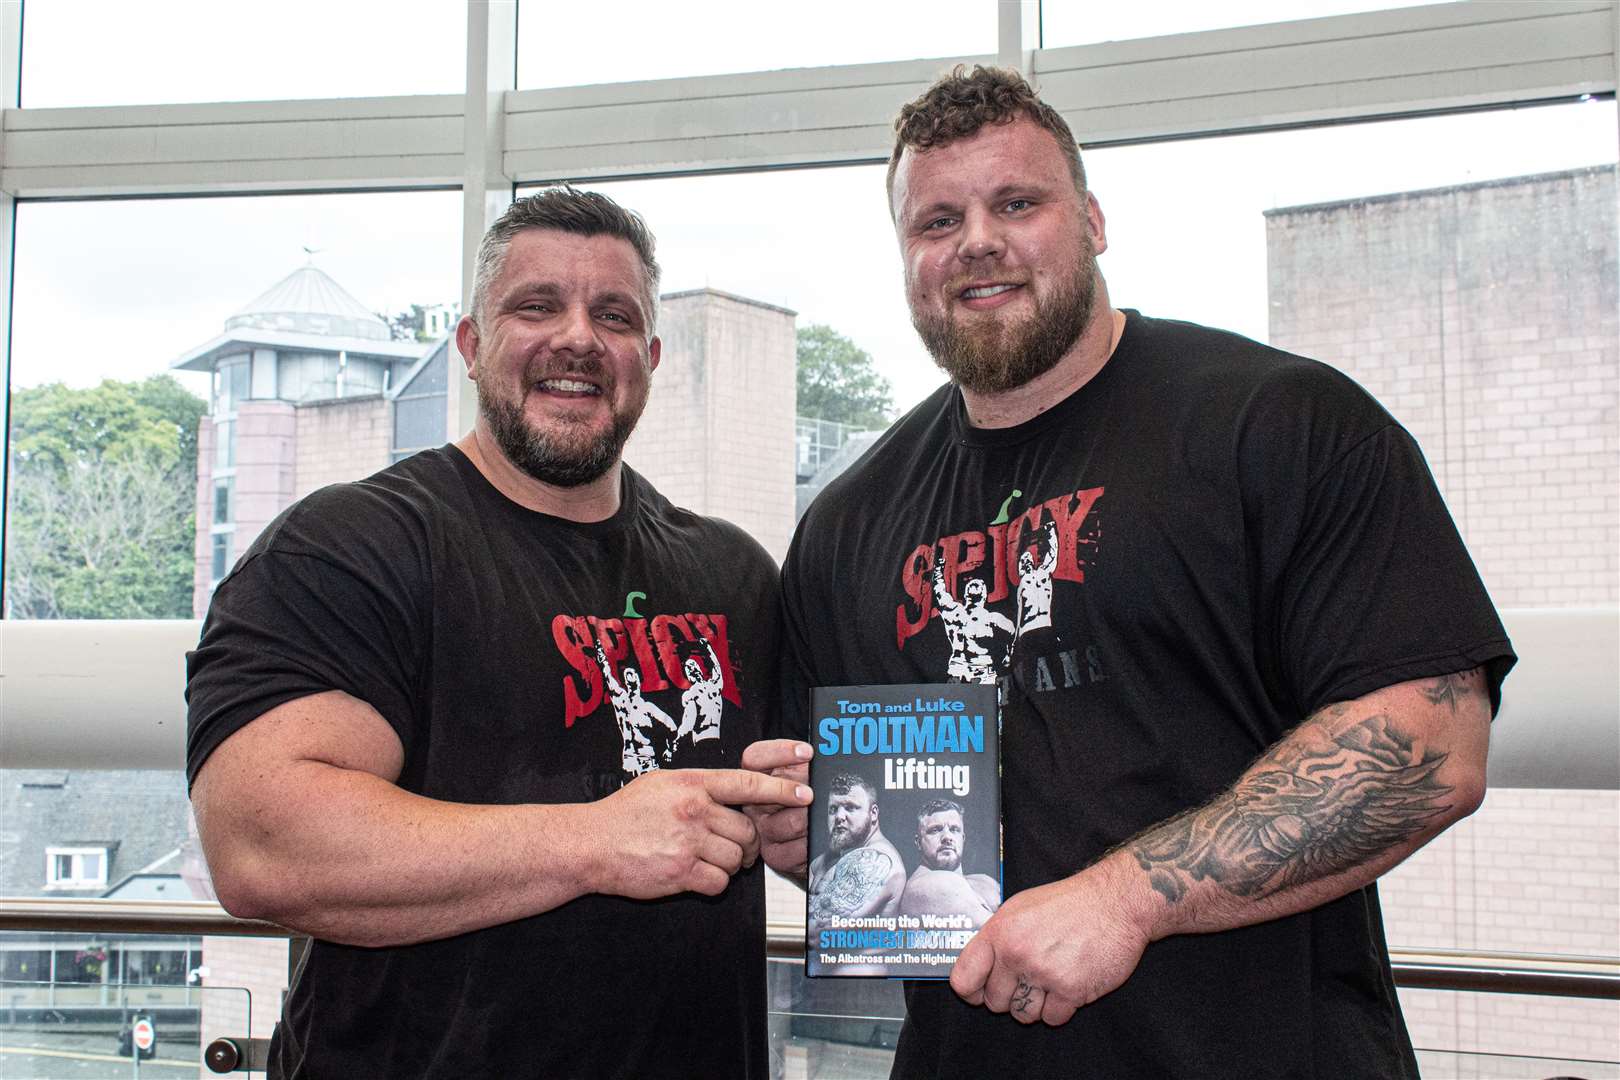 Brothers Luke and Tom Stoltman attending an earlier special signing event at Waterstones to coincide with the launch of their new book,'Lifting'. Picture: Niall Harkiss